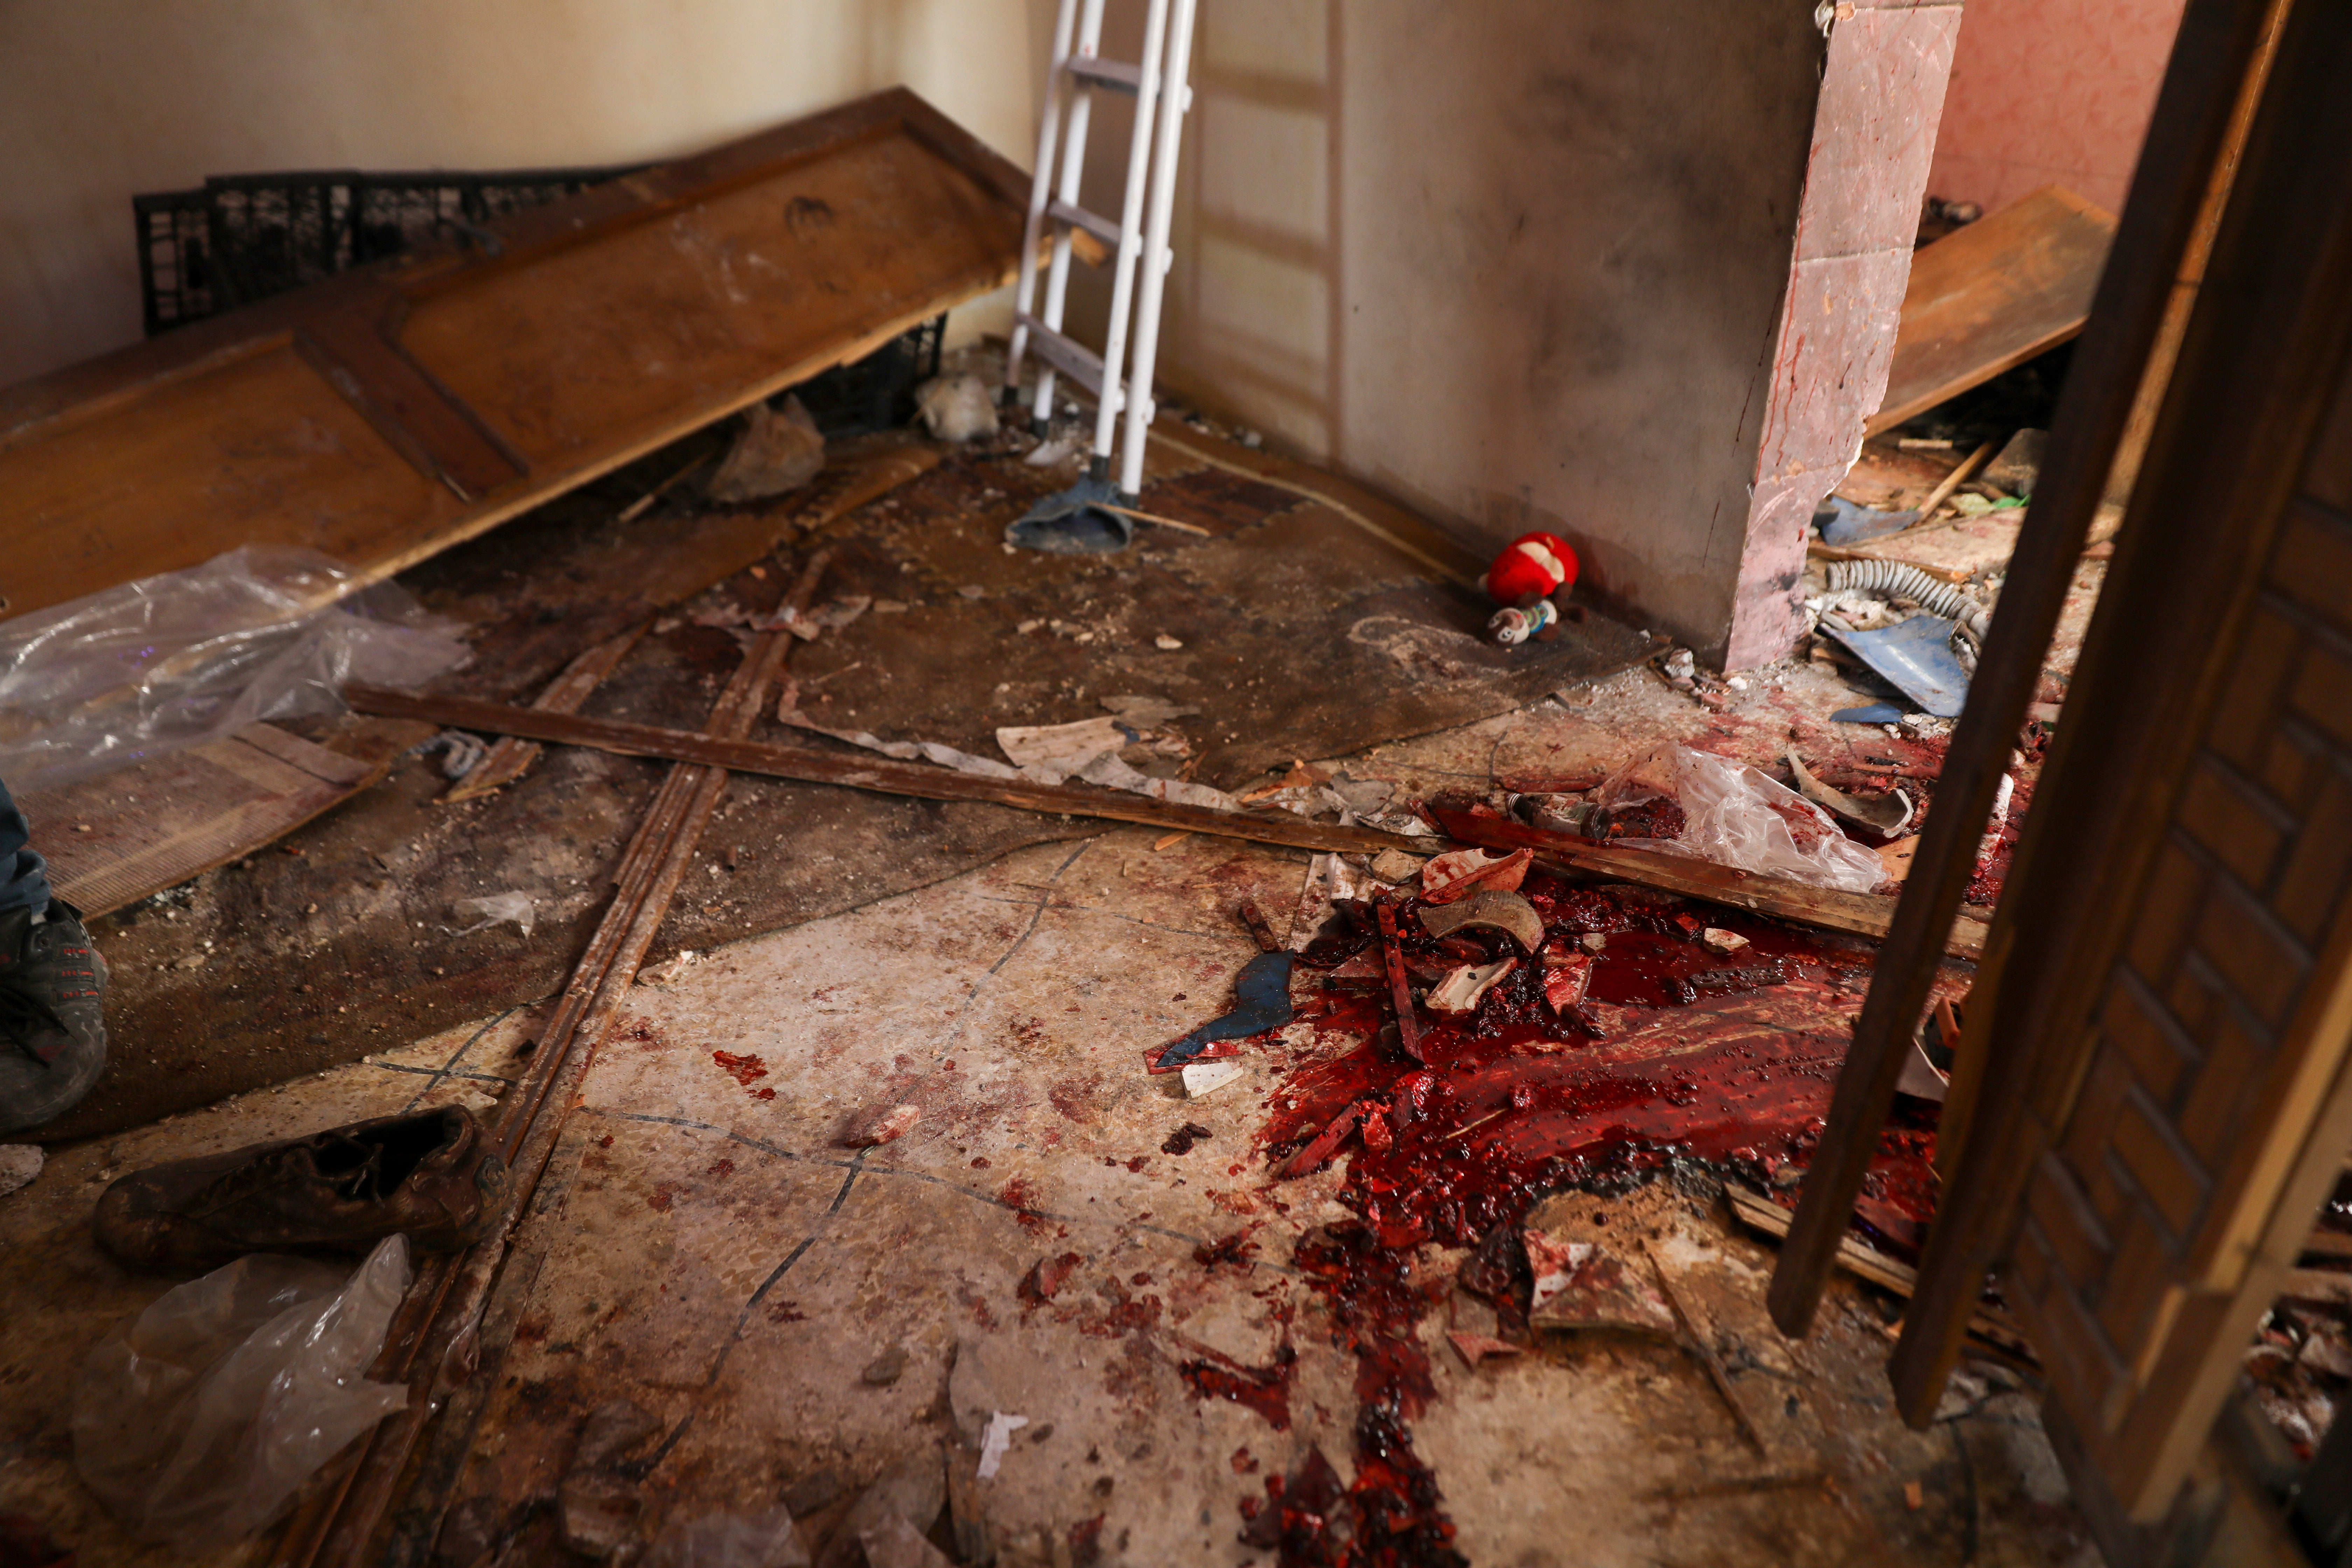 Blood covers the floor of a destroyed house after an operation by the U.S. military in the Syrian village of Atmeh in Idlib province, Syria, Thursday, Feb. 3, 2022